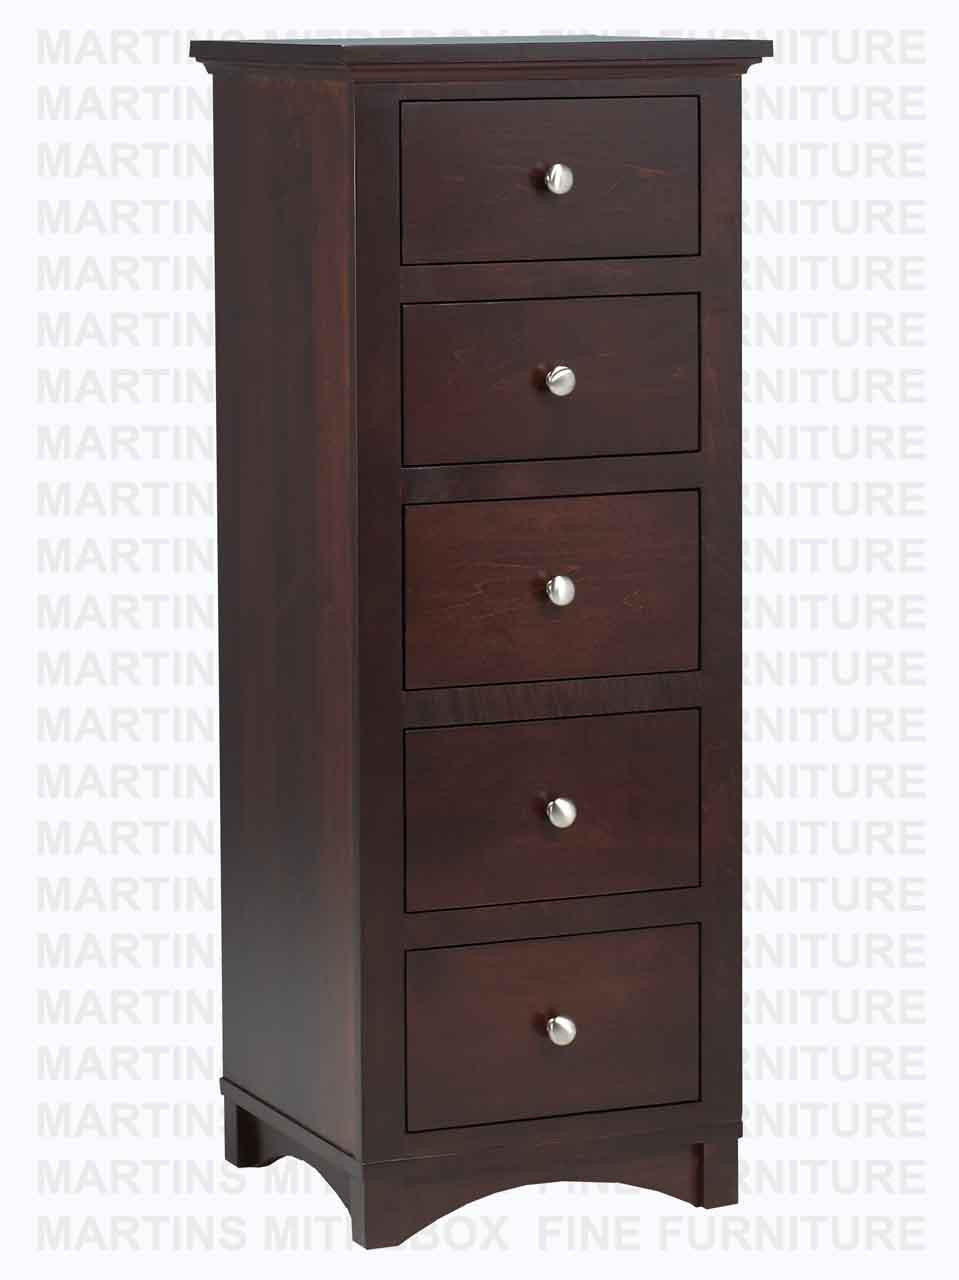 Wormy Maple Montana Lingerie Chest 18''D x 20''W x 52''H